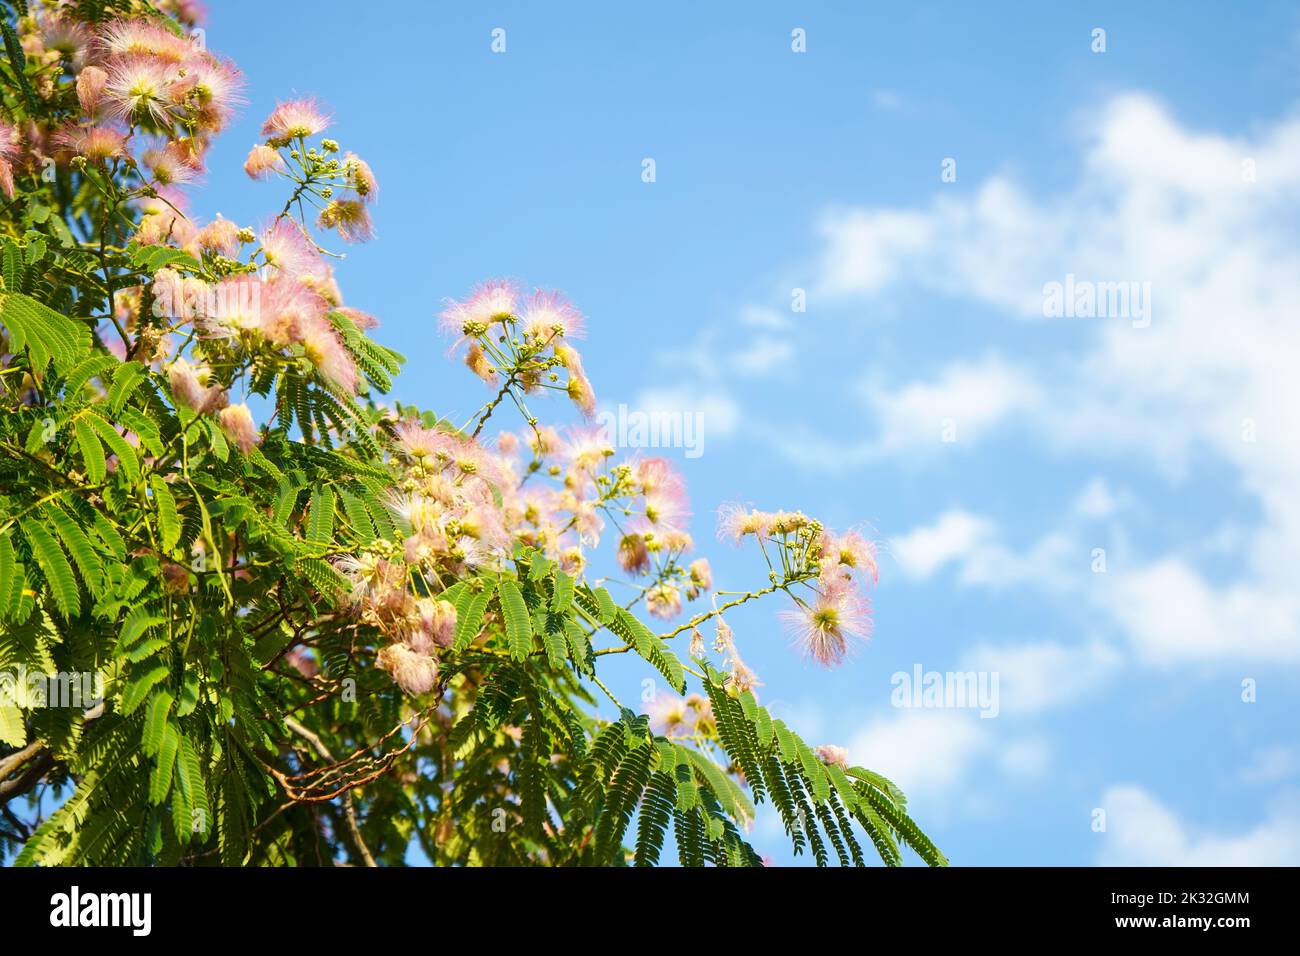 Pink fluffy flowers of Persian silk tree (Albizia julibrissin) on blue sky background. Japanese acacia or pink silk tree the family Fabaceae. Stock Photo